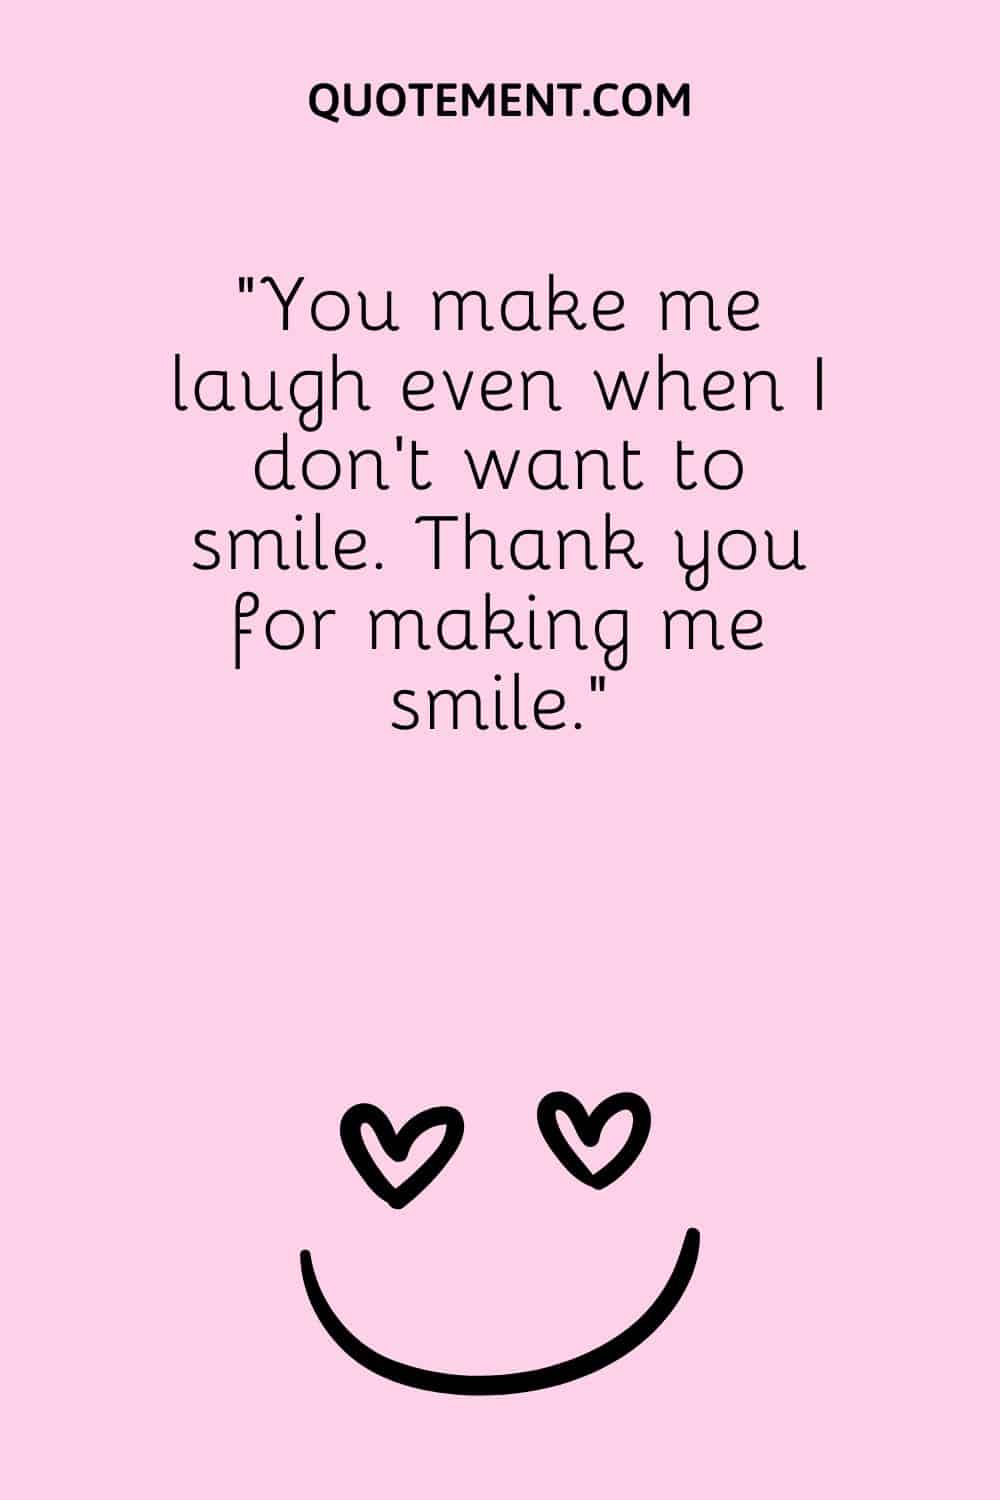 You make me laugh even when I don’t want to smile.